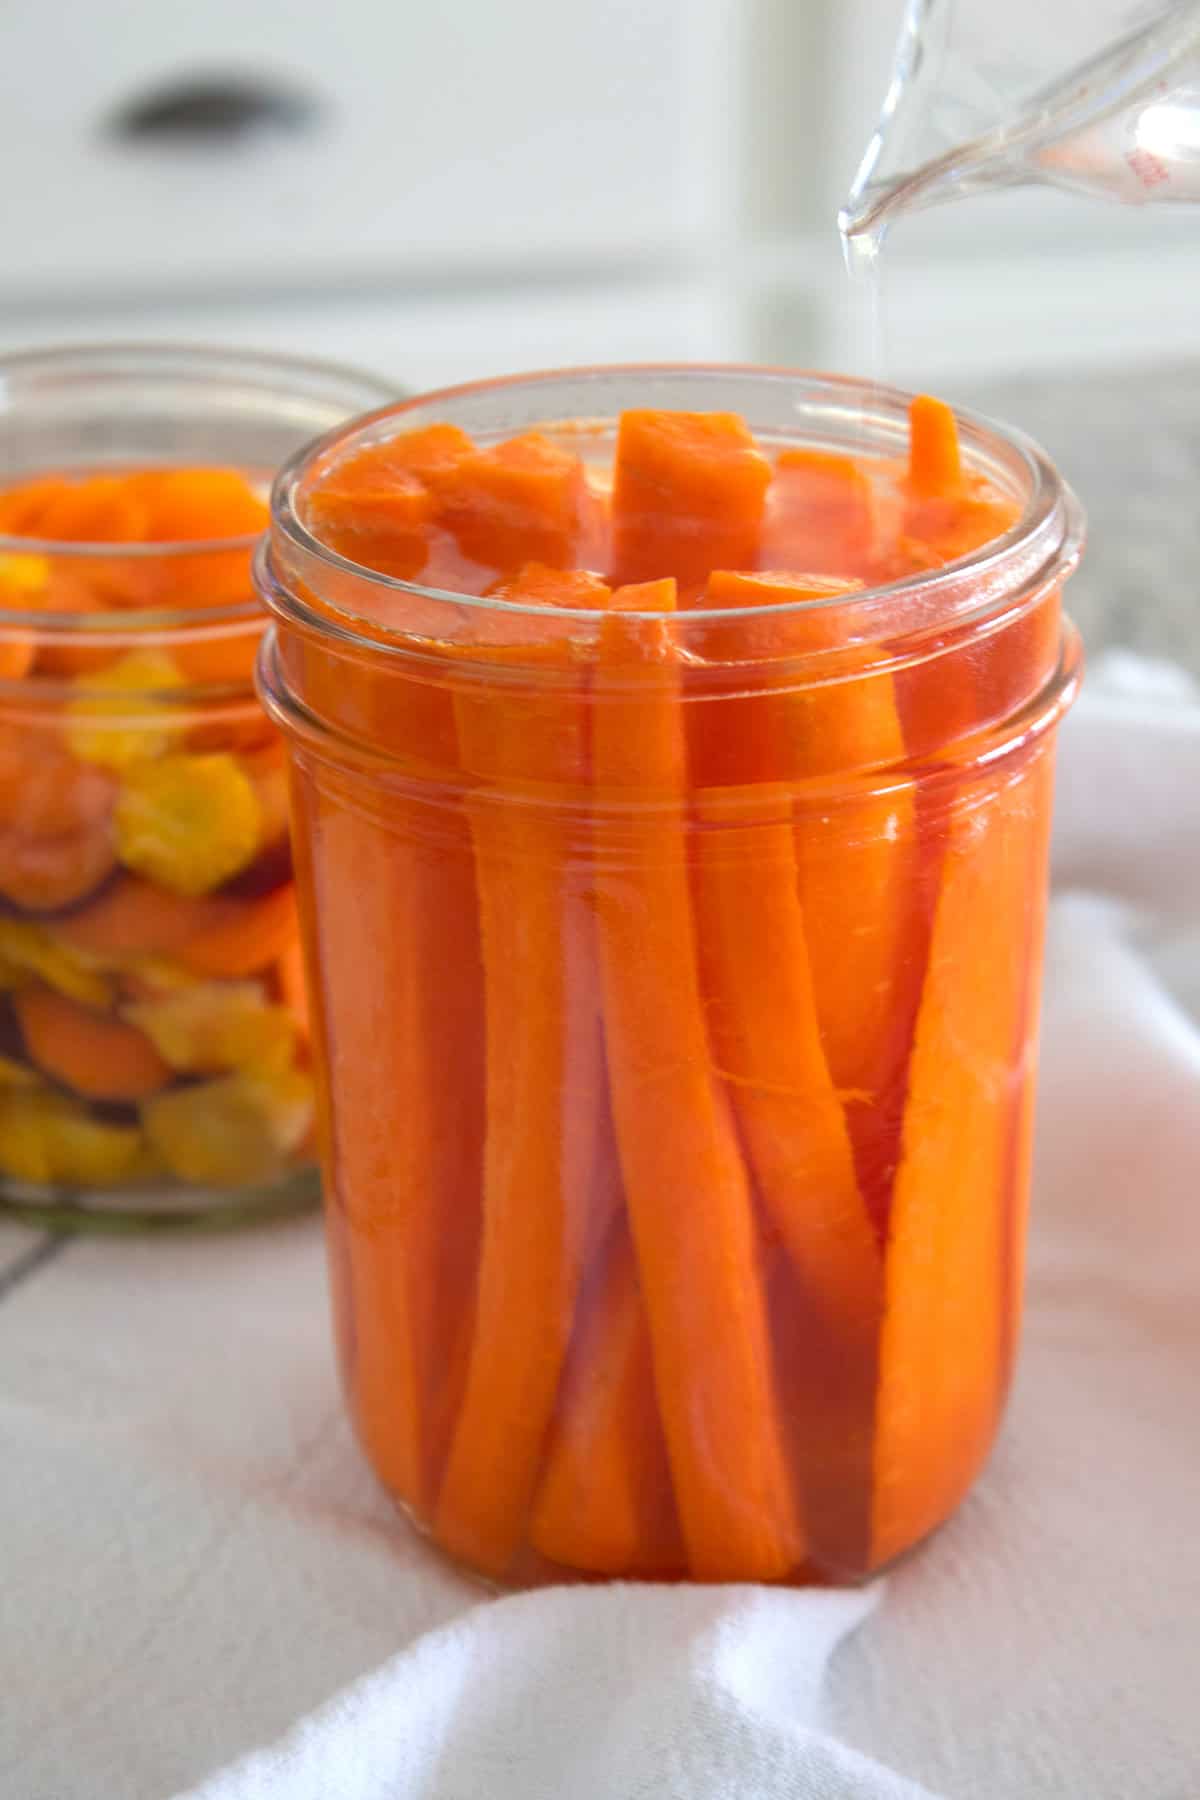 pouring brine over carrots in a jar